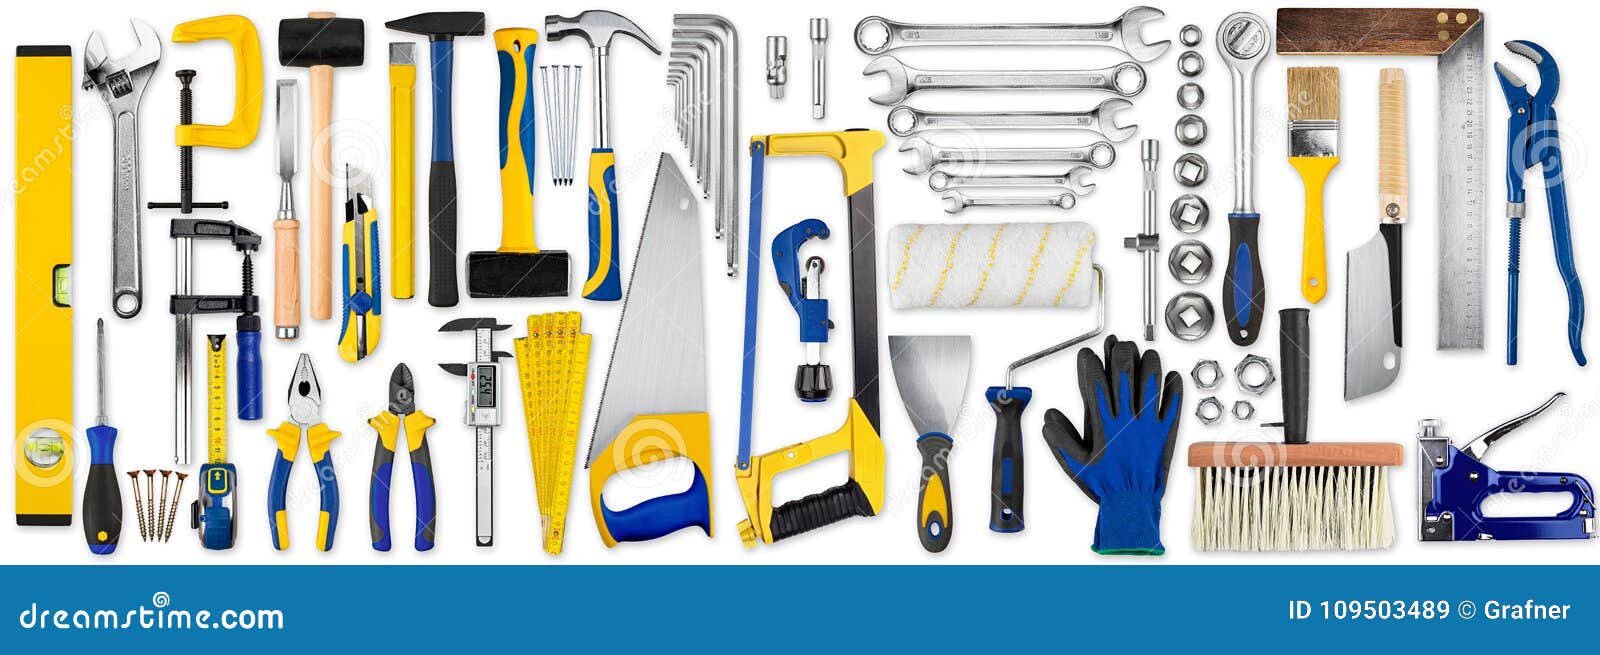 hand tools set collection